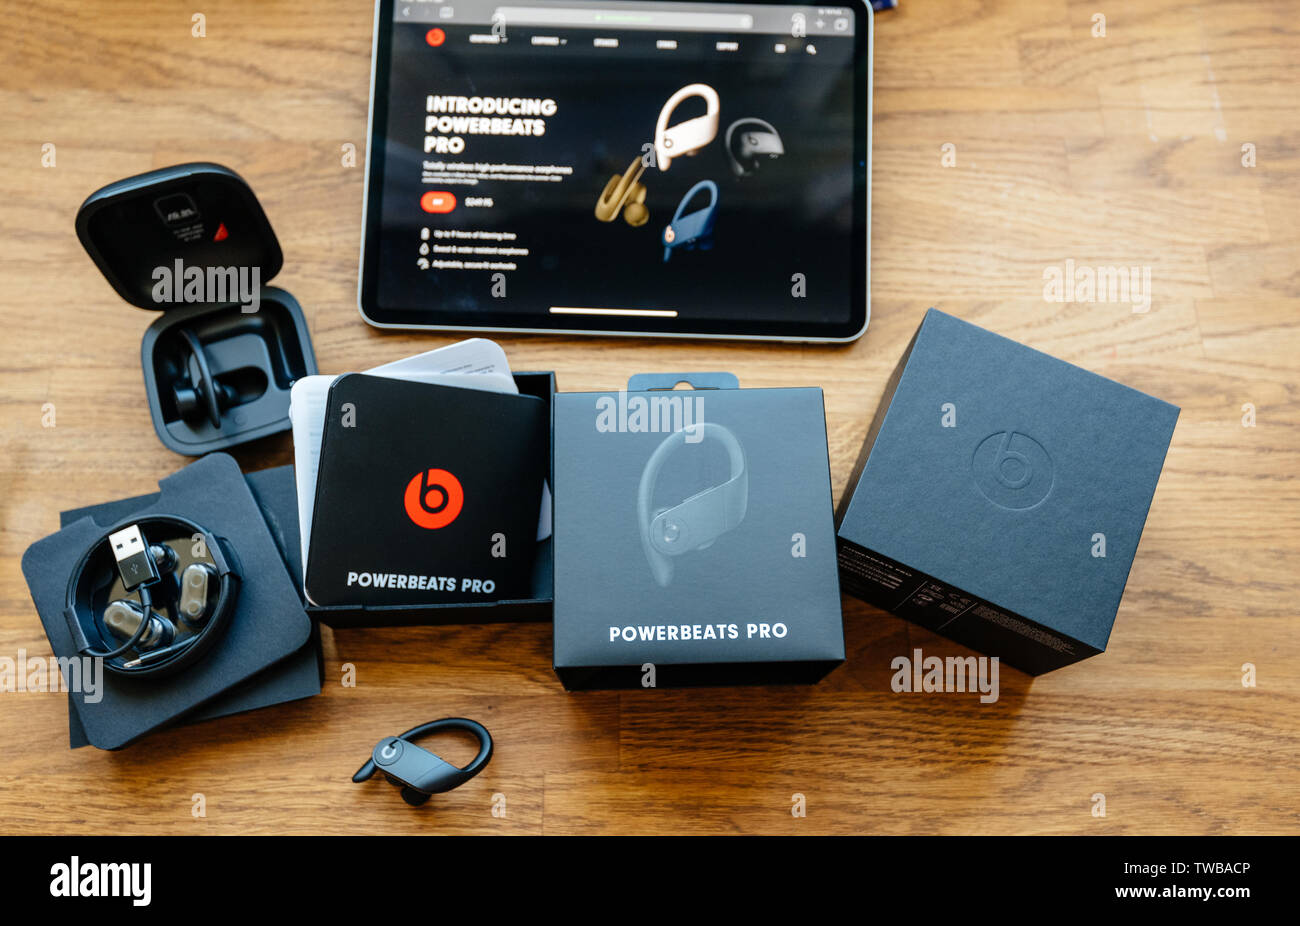 Paris, France - Jun 17, 2019: Unboxing of Powerbeats Pro Beats by Dr Dre wireless high-performance earphones waterproof and workout professional headphones Stock Photo